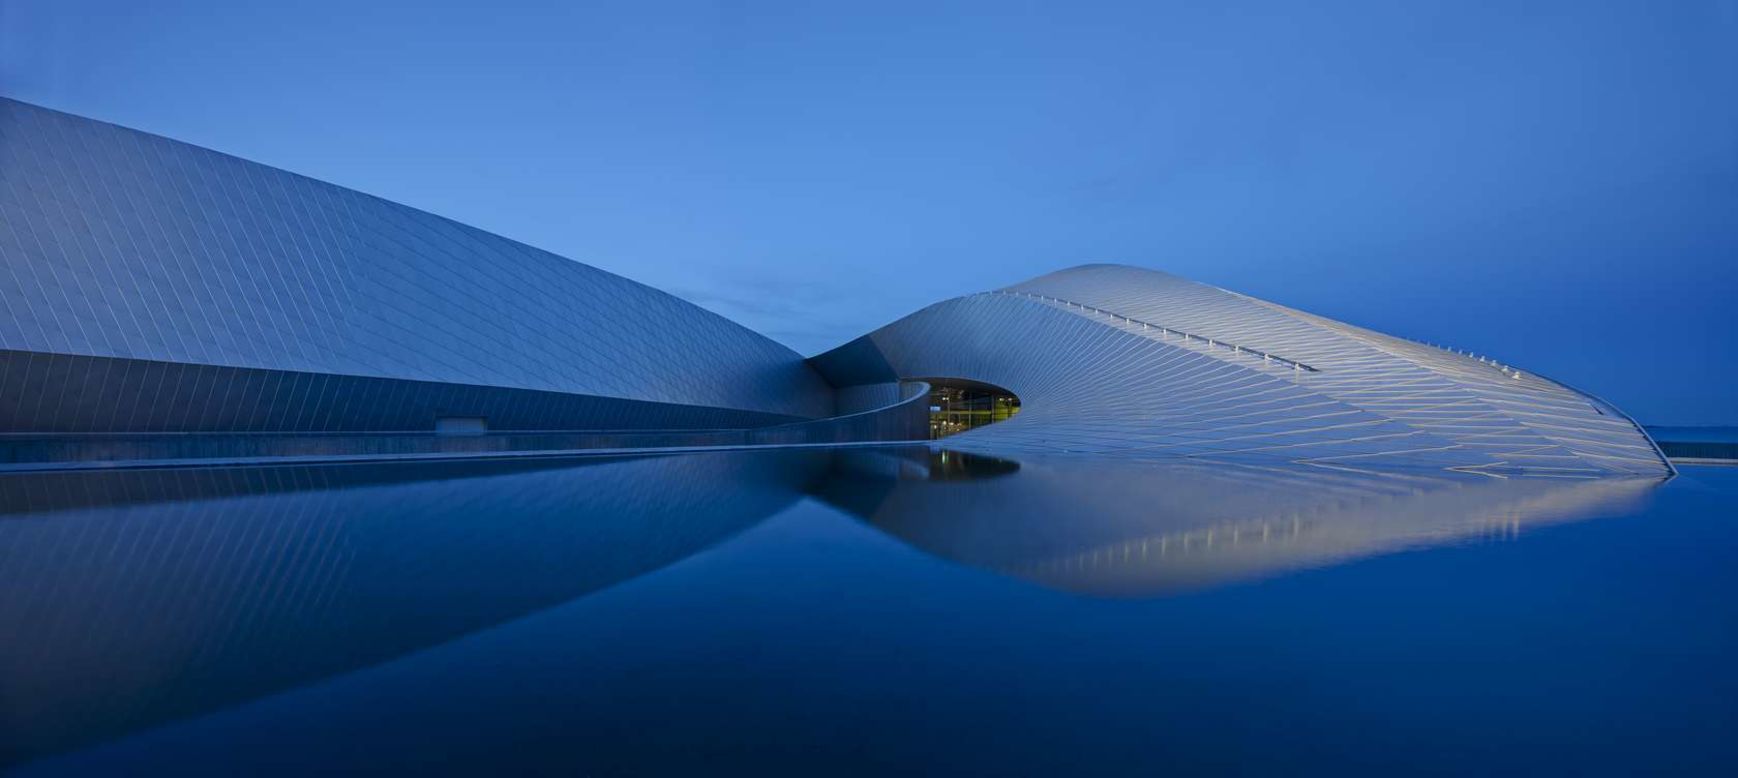 Designed by 3XN, this stunning aquarium was Inspired by the shape of natural whirlpools, water streams, shoals of fish and flocks of birds. It was completed in 2013. 